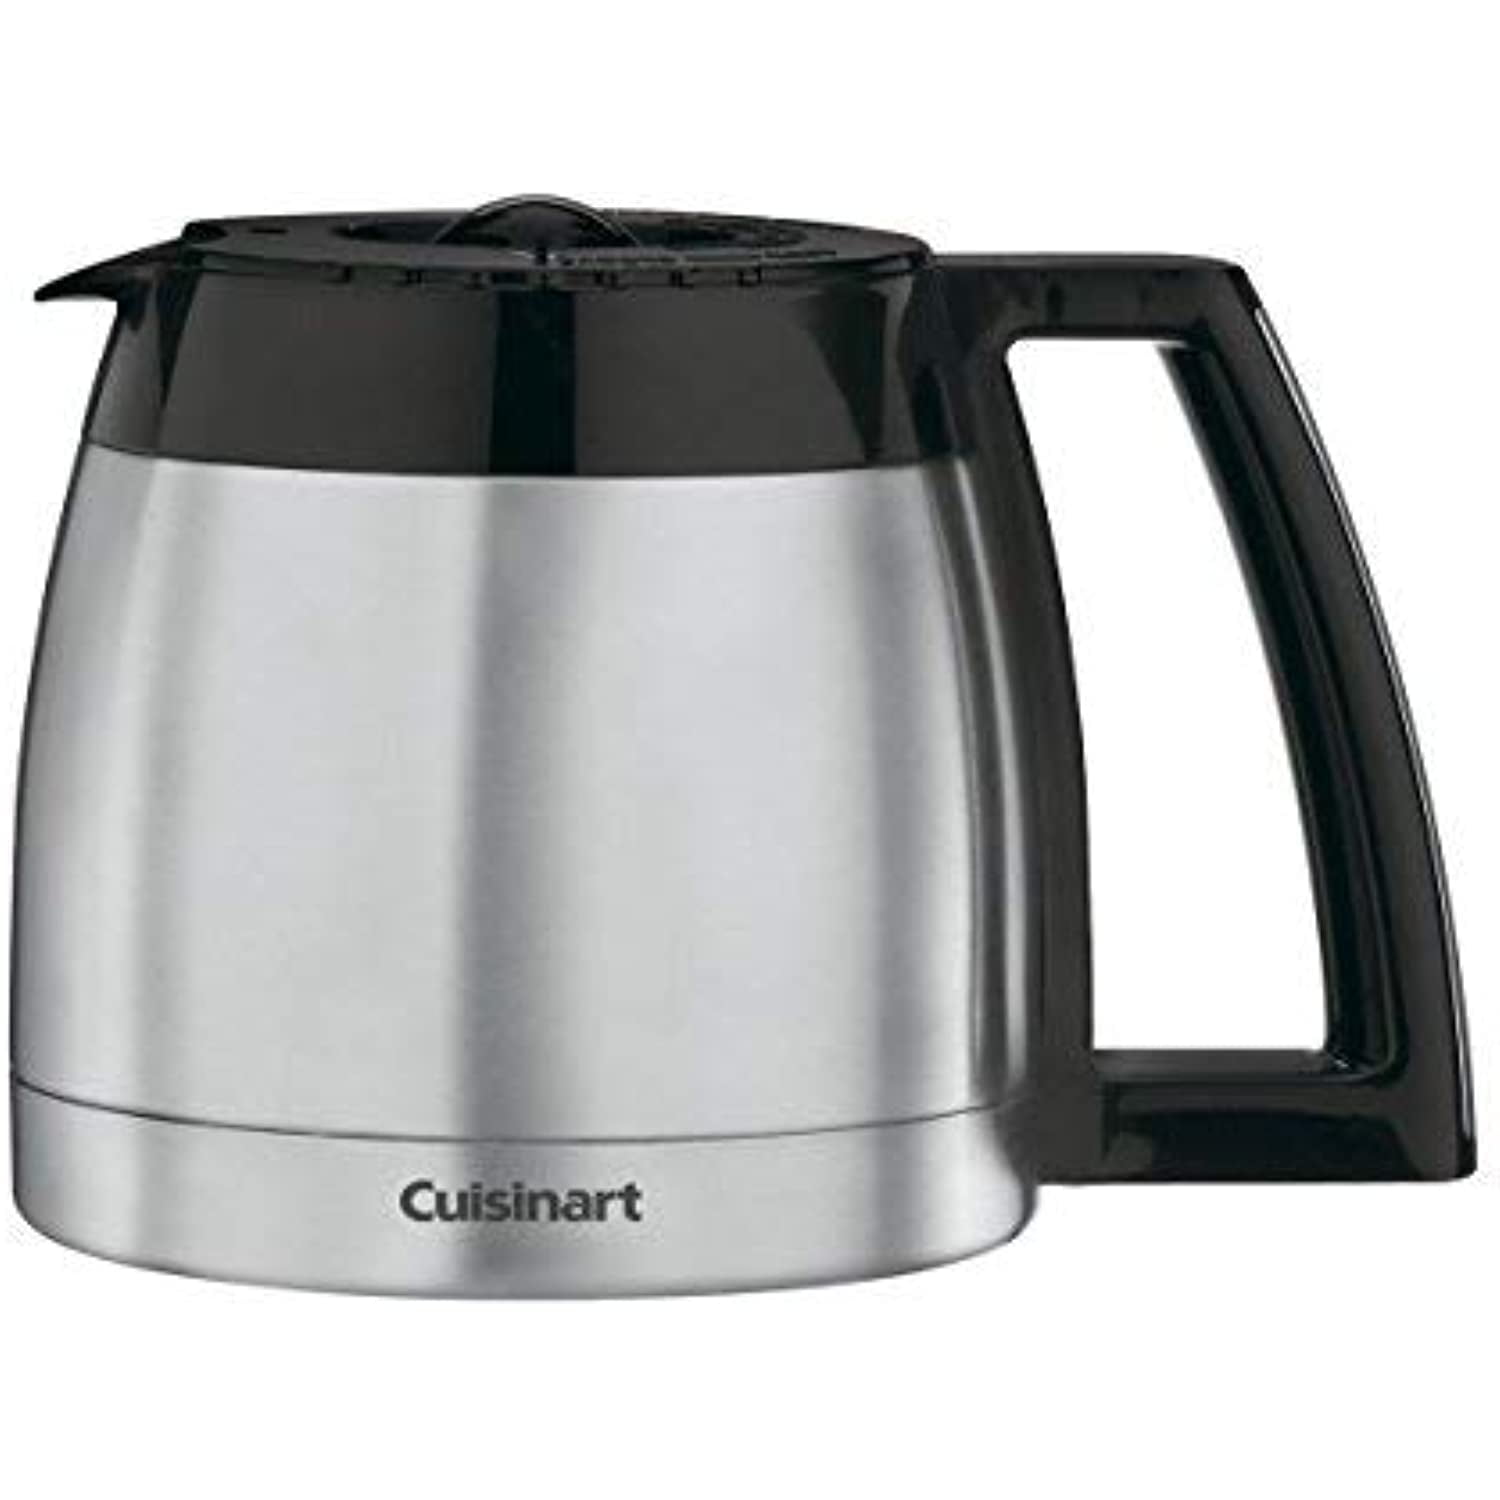 Cuisinart® Grind & Brew 12-Cup Coffeemaker - Stainless Steel, 1 ct - Fred  Meyer